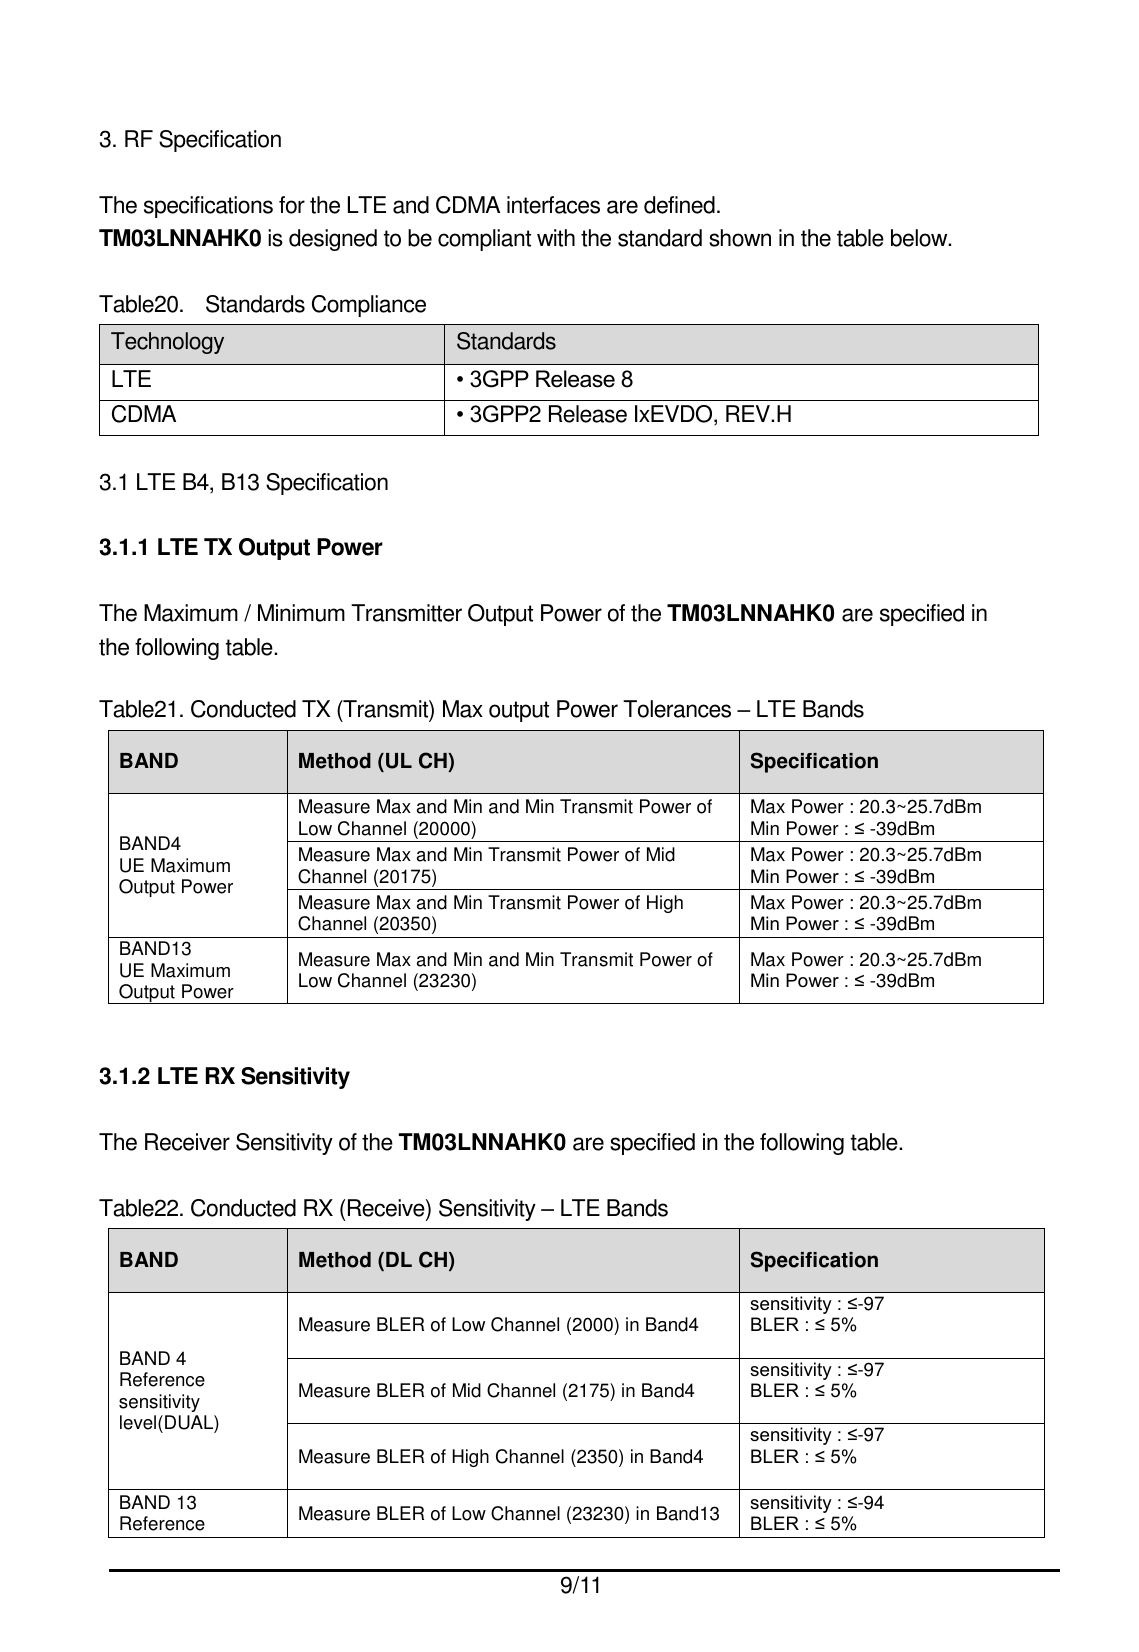  9/11   3. RF Specification  The specifications for the LTE and CDMA interfaces are defined. TM03LNNAHK0 is designed to be compliant with the standard shown in the table below.  Table20.   Standards Compliance Technology Standards LTE • 3GPP Release 8 CDMA • 3GPP2 Release IxEVDO, REV.H  3.1 LTE B4, B13 Specification  3.1.1 LTE TX Output Power  The Maximum / Minimum Transmitter Output Power of the TM03LNNAHK0 are specified in   the following table.  Table21. Conducted TX (Transmit) Max output Power Tolerances – LTE Bands BAND Method (UL CH) Specification BAND4 UE Maximum Output Power Measure Max and Min and Min Transmit Power of Low Channel (20000) Max Power : 20.3~25.7dBm Min Power : ≤ -39dBm Measure Max and Min Transmit Power of Mid   Channel (20175) Max Power : 20.3~25.7dBm Min Power : ≤ -39dBm Measure Max and Min Transmit Power of High   Channel (20350) Max Power : 20.3~25.7dBm Min Power : ≤ -39dBm BAND13 UE Maximum Output Power Measure Max and Min and Min Transmit Power of Low Channel (23230) Max Power : 20.3~25.7dBm Min Power : ≤ -39dBm   3.1.2 LTE RX Sensitivity  The Receiver Sensitivity of the TM03LNNAHK0 are specified in the following table.  Table22. Conducted RX (Receive) Sensitivity – LTE Bands BAND Method (DL CH) Specification BAND 4 Reference sensitivity level(DUAL) Measure BLER of Low Channel (2000) in Band4 sensitivity : ≤-97 BLER : ≤ 5%    Measure BLER of Mid Channel (2175) in Band4 sensitivity : ≤-97 BLER : ≤ 5%    Measure BLER of High Channel (2350) in Band4 sensitivity : ≤-97 BLER : ≤ 5%    BAND 13 Reference Measure BLER of Low Channel (23230) in Band13 sensitivity : ≤-94 BLER : ≤ 5%   